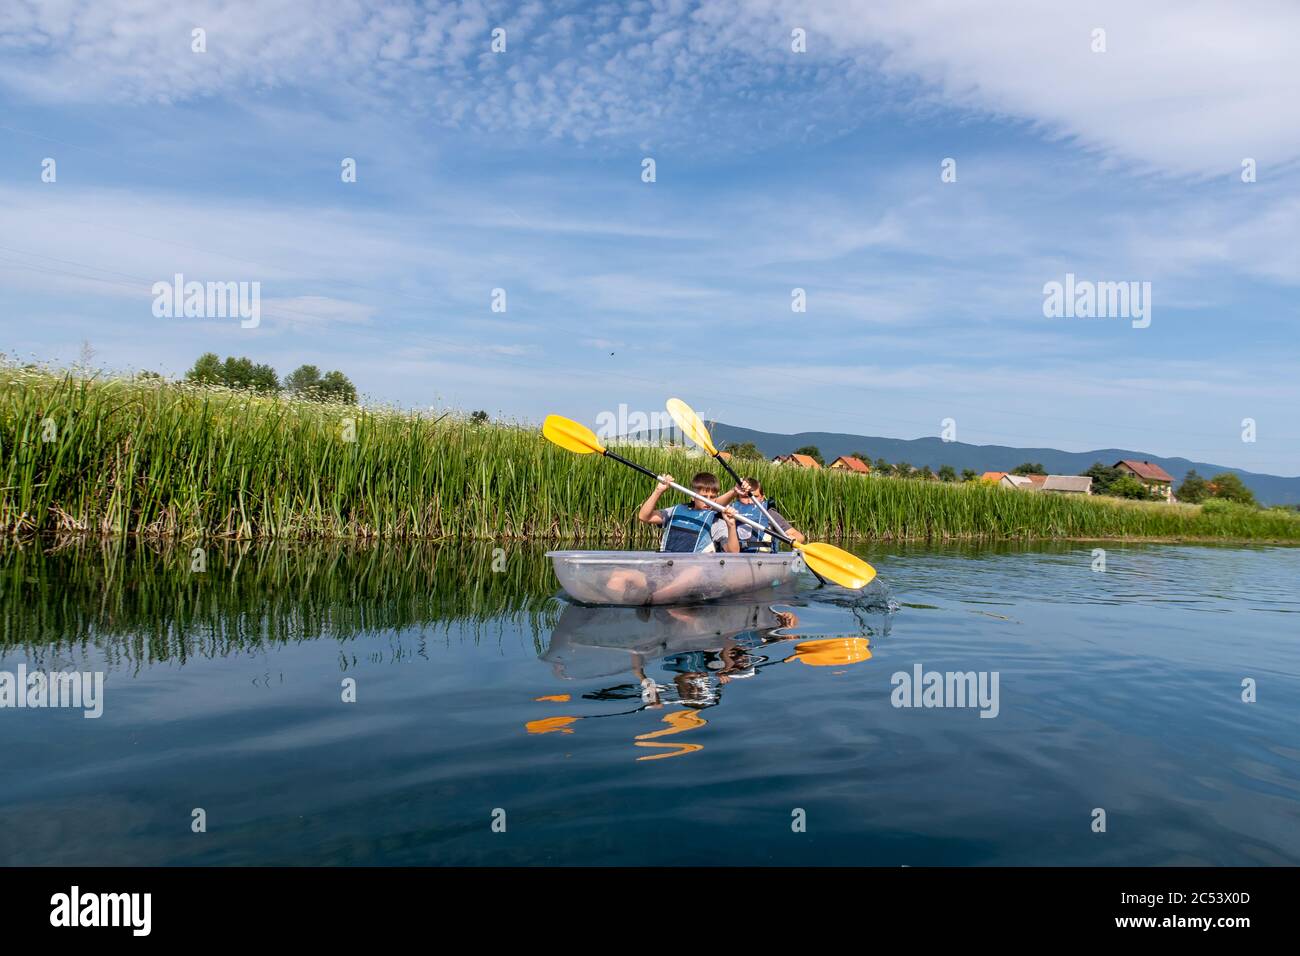 Young people enjoying a kayacking experience on the calm clear waters of the river Gacka, Otocac, Lika, Croatia Stock Photo